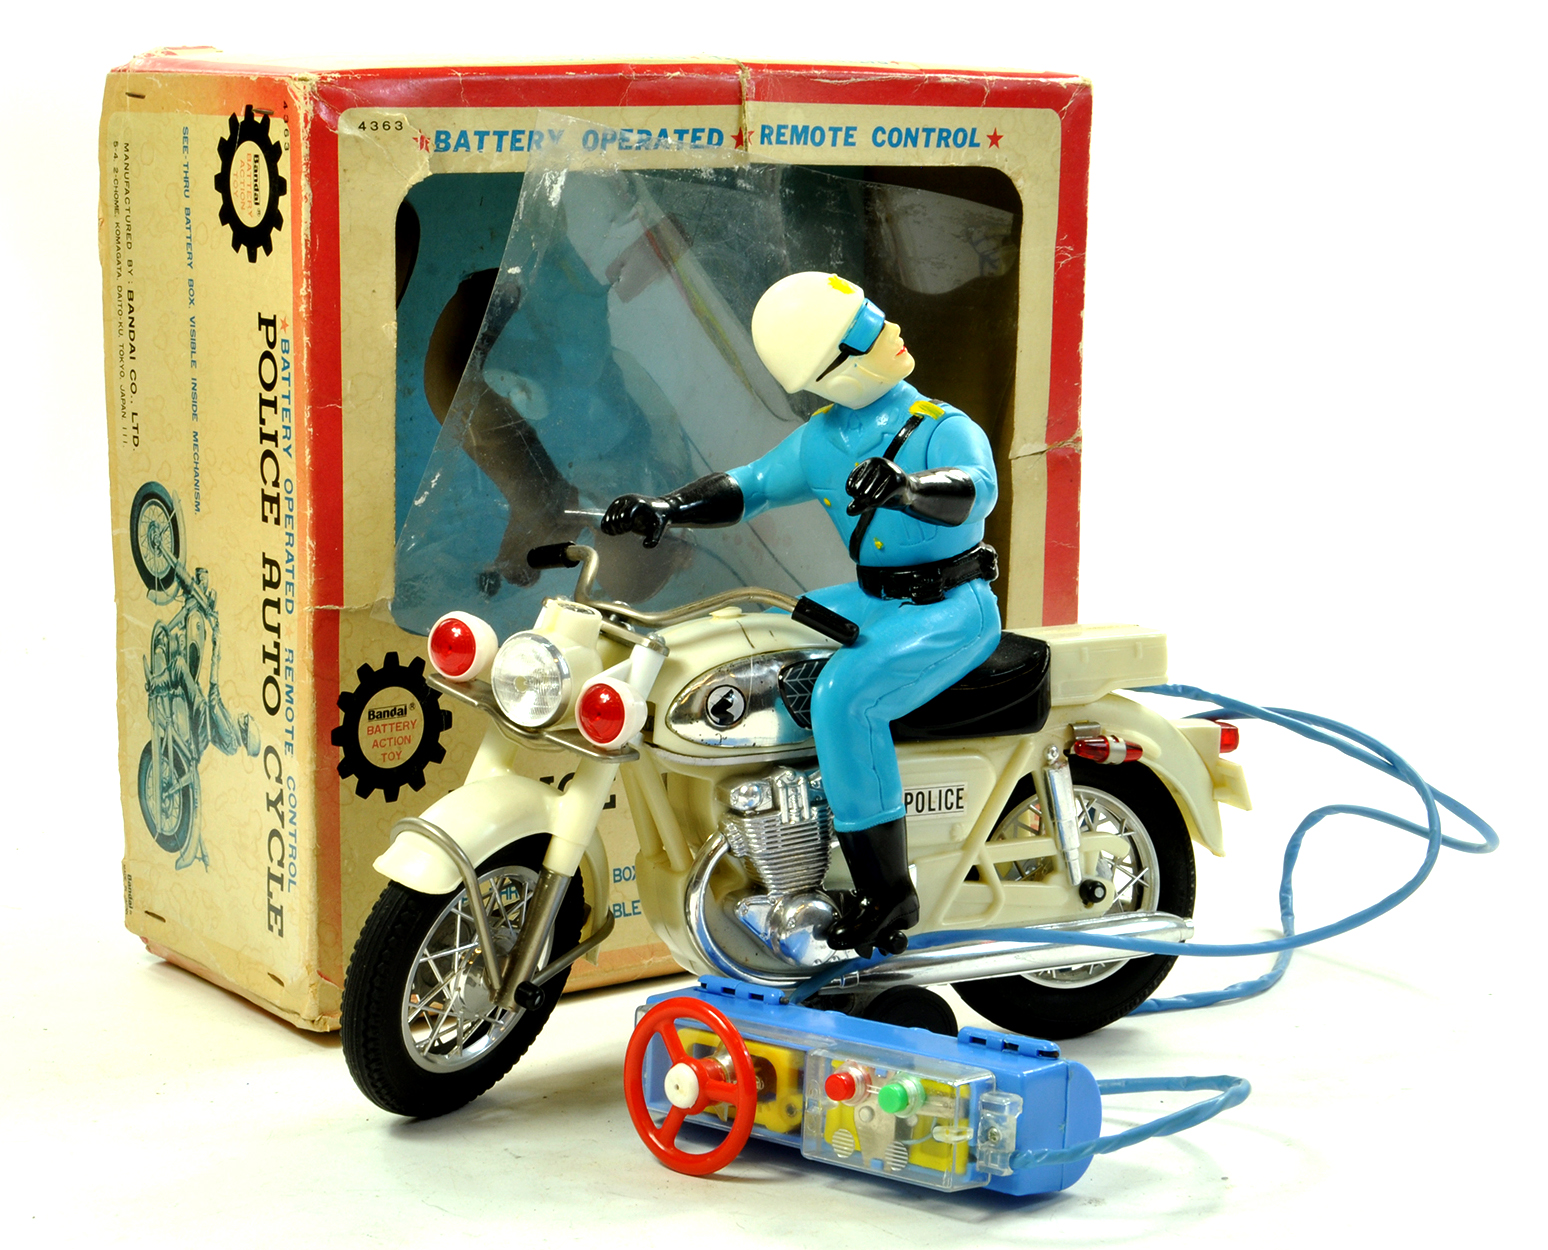 Bandai Battery Operated Police Motorcycle. Untested but appears to be very good, complete with